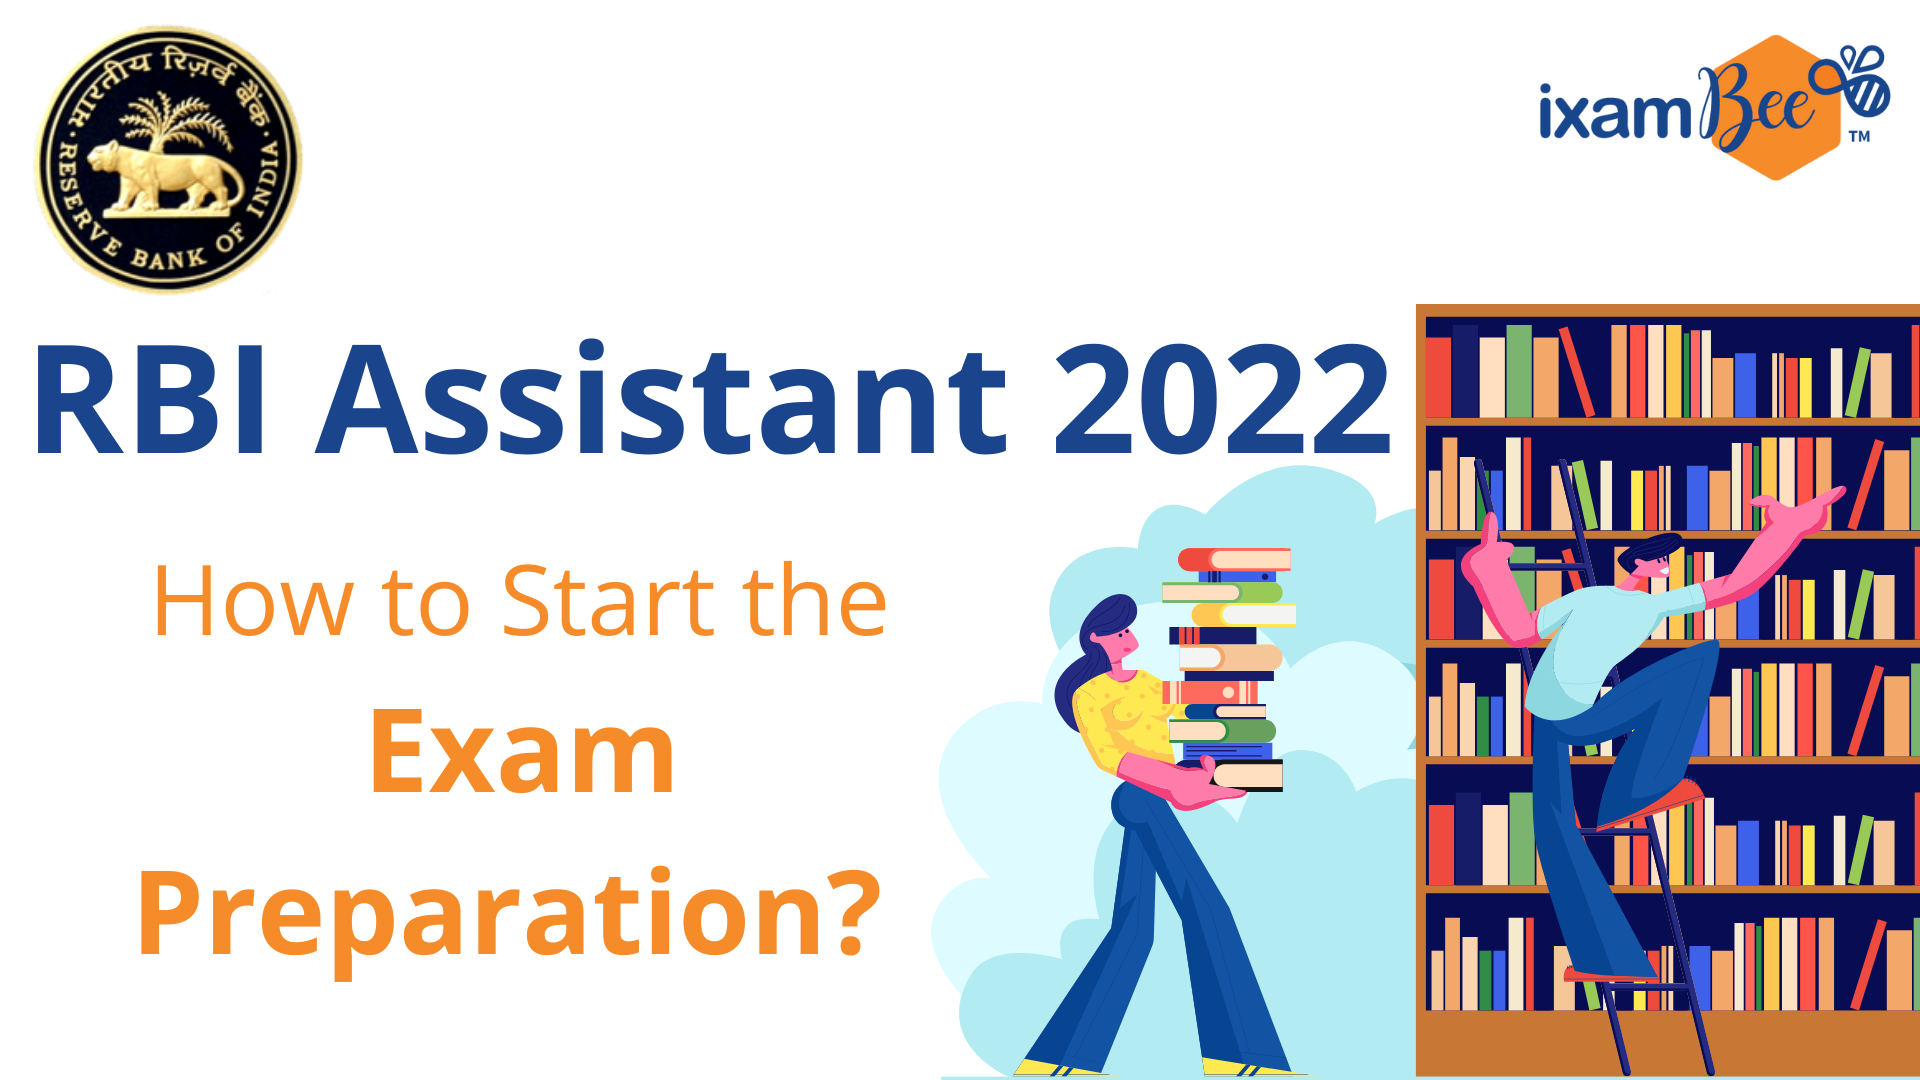 RBI Assistant 2022: How to Start the Exam Preparation?